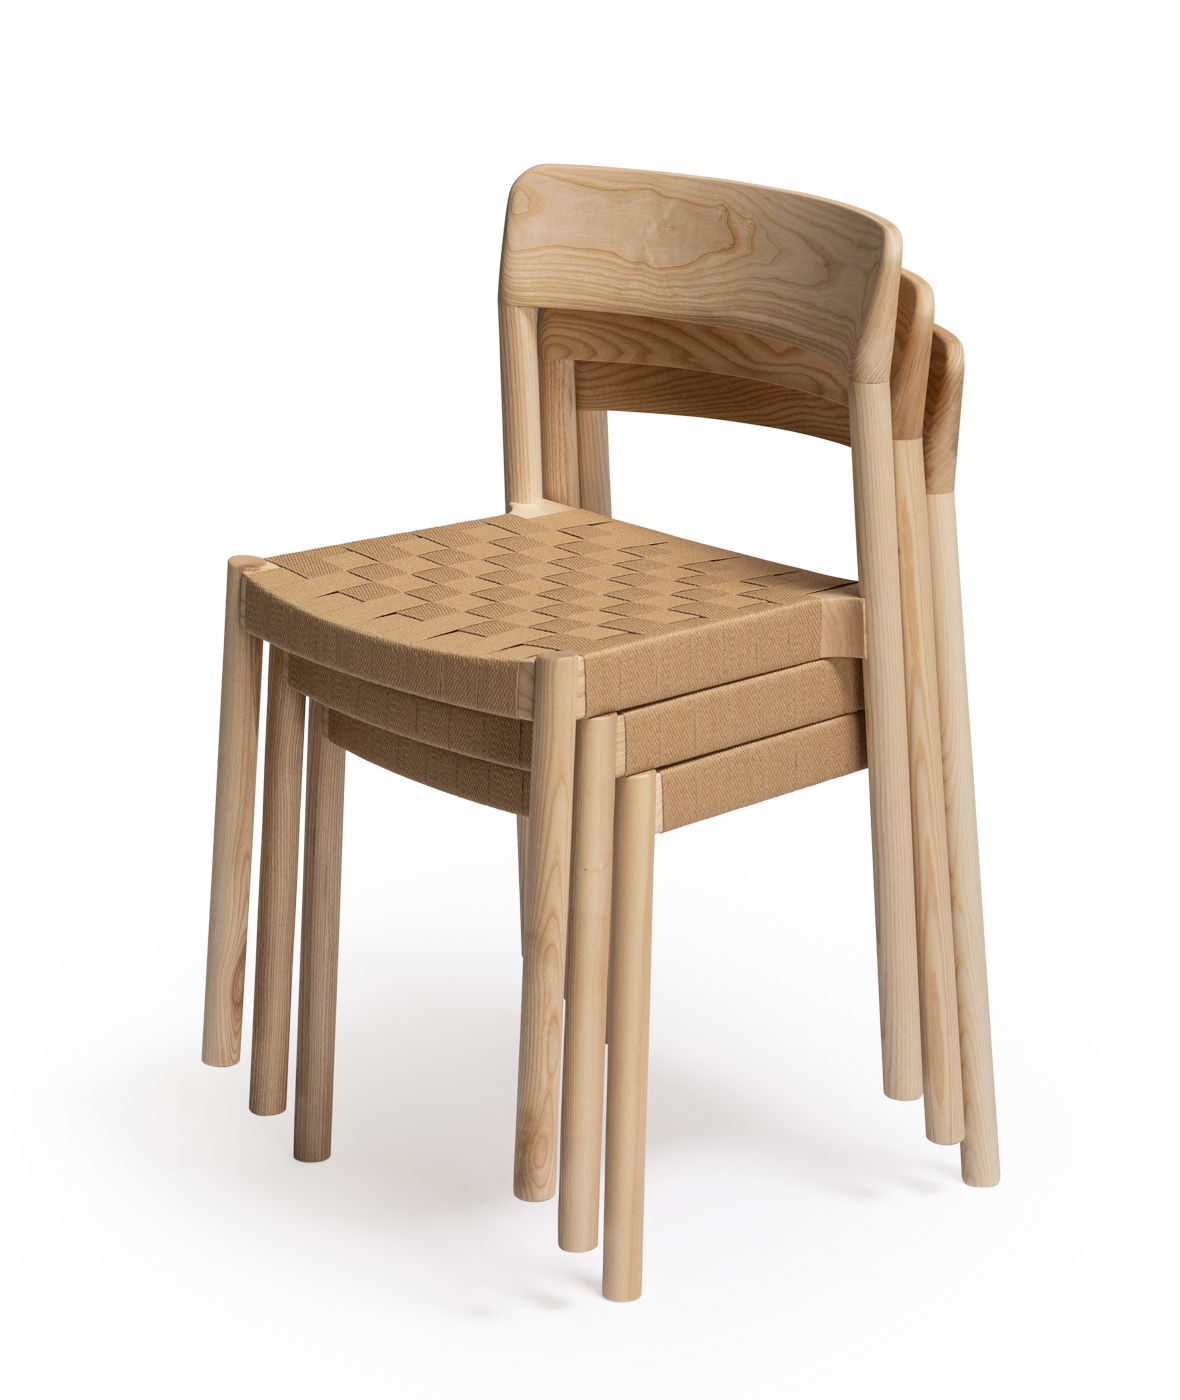 Nela chair with seat in wide paper wicker - Vergés